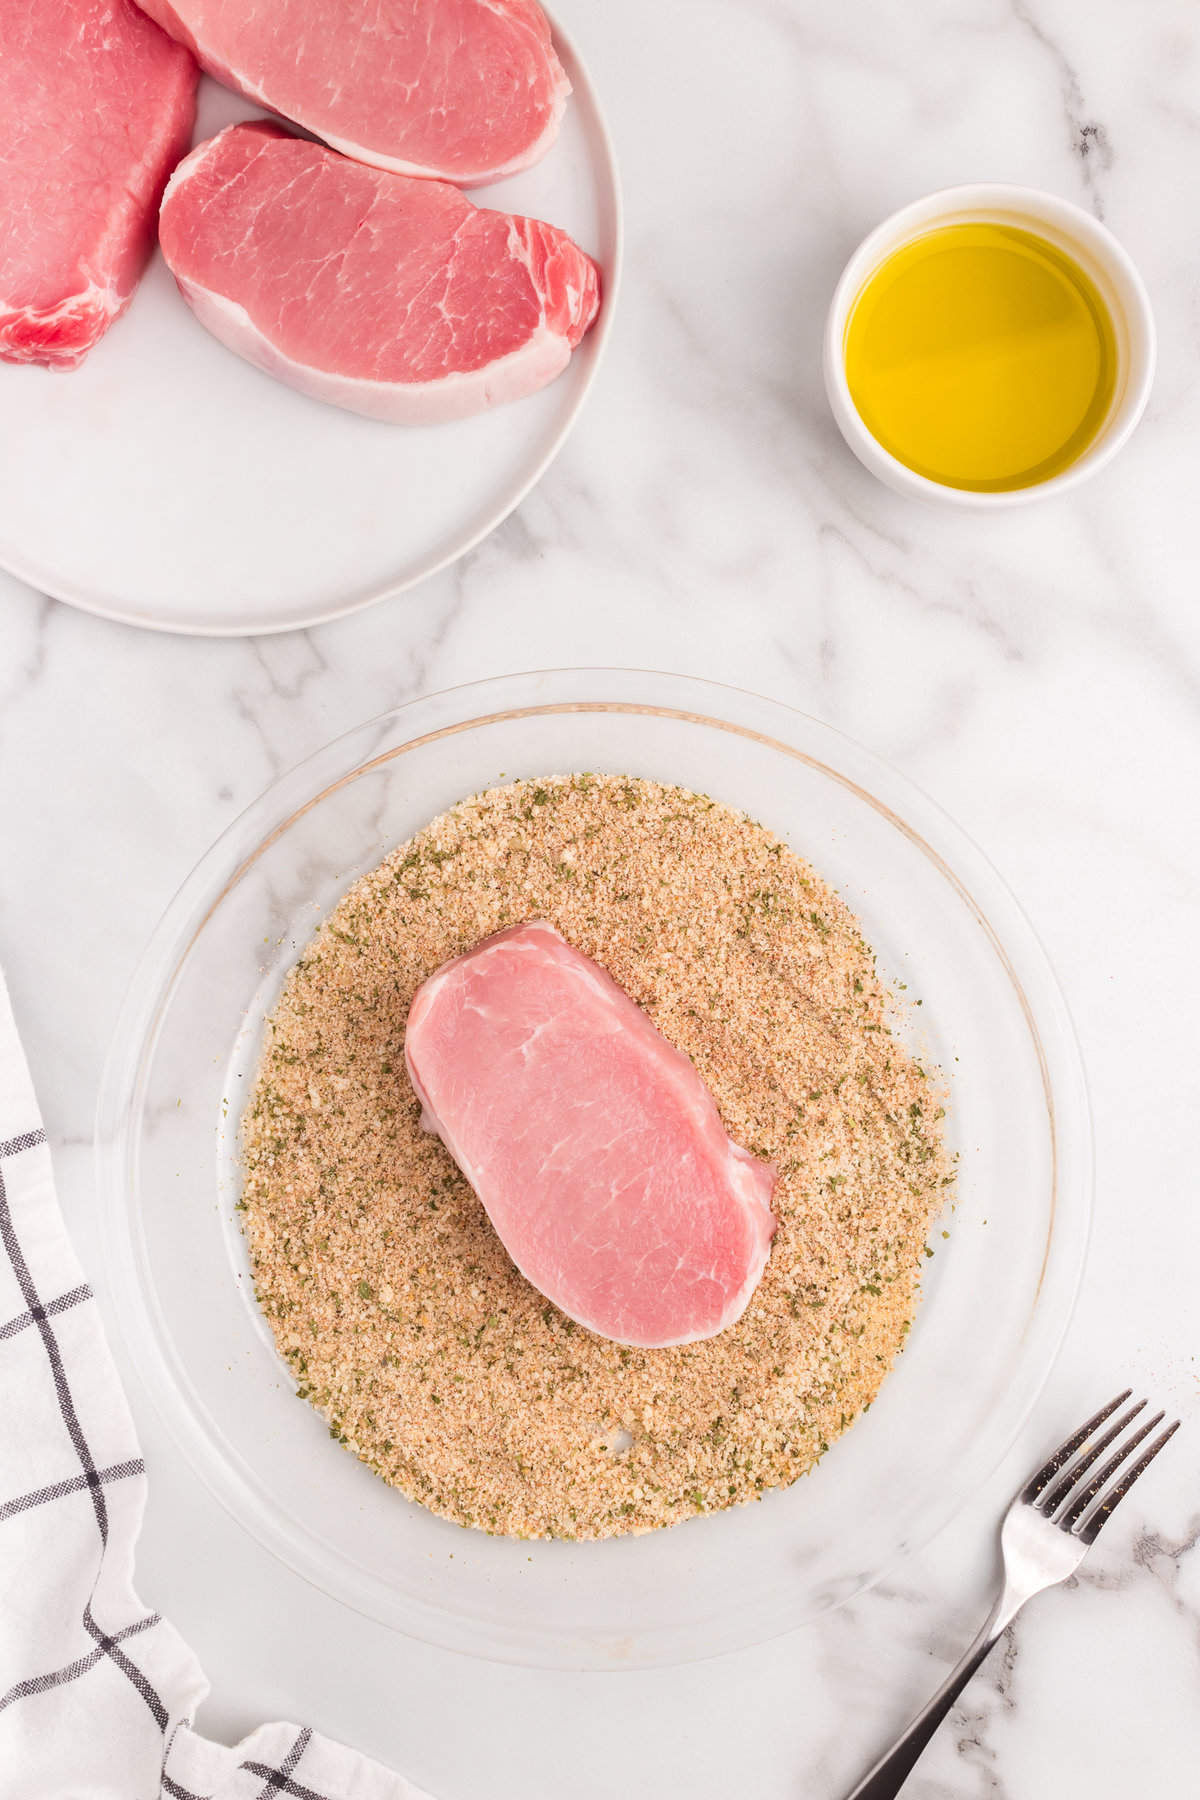 With combined seasonings in bowl a boneless pork chop slice is added for the Parmesan Crusted Pork Chops recipe